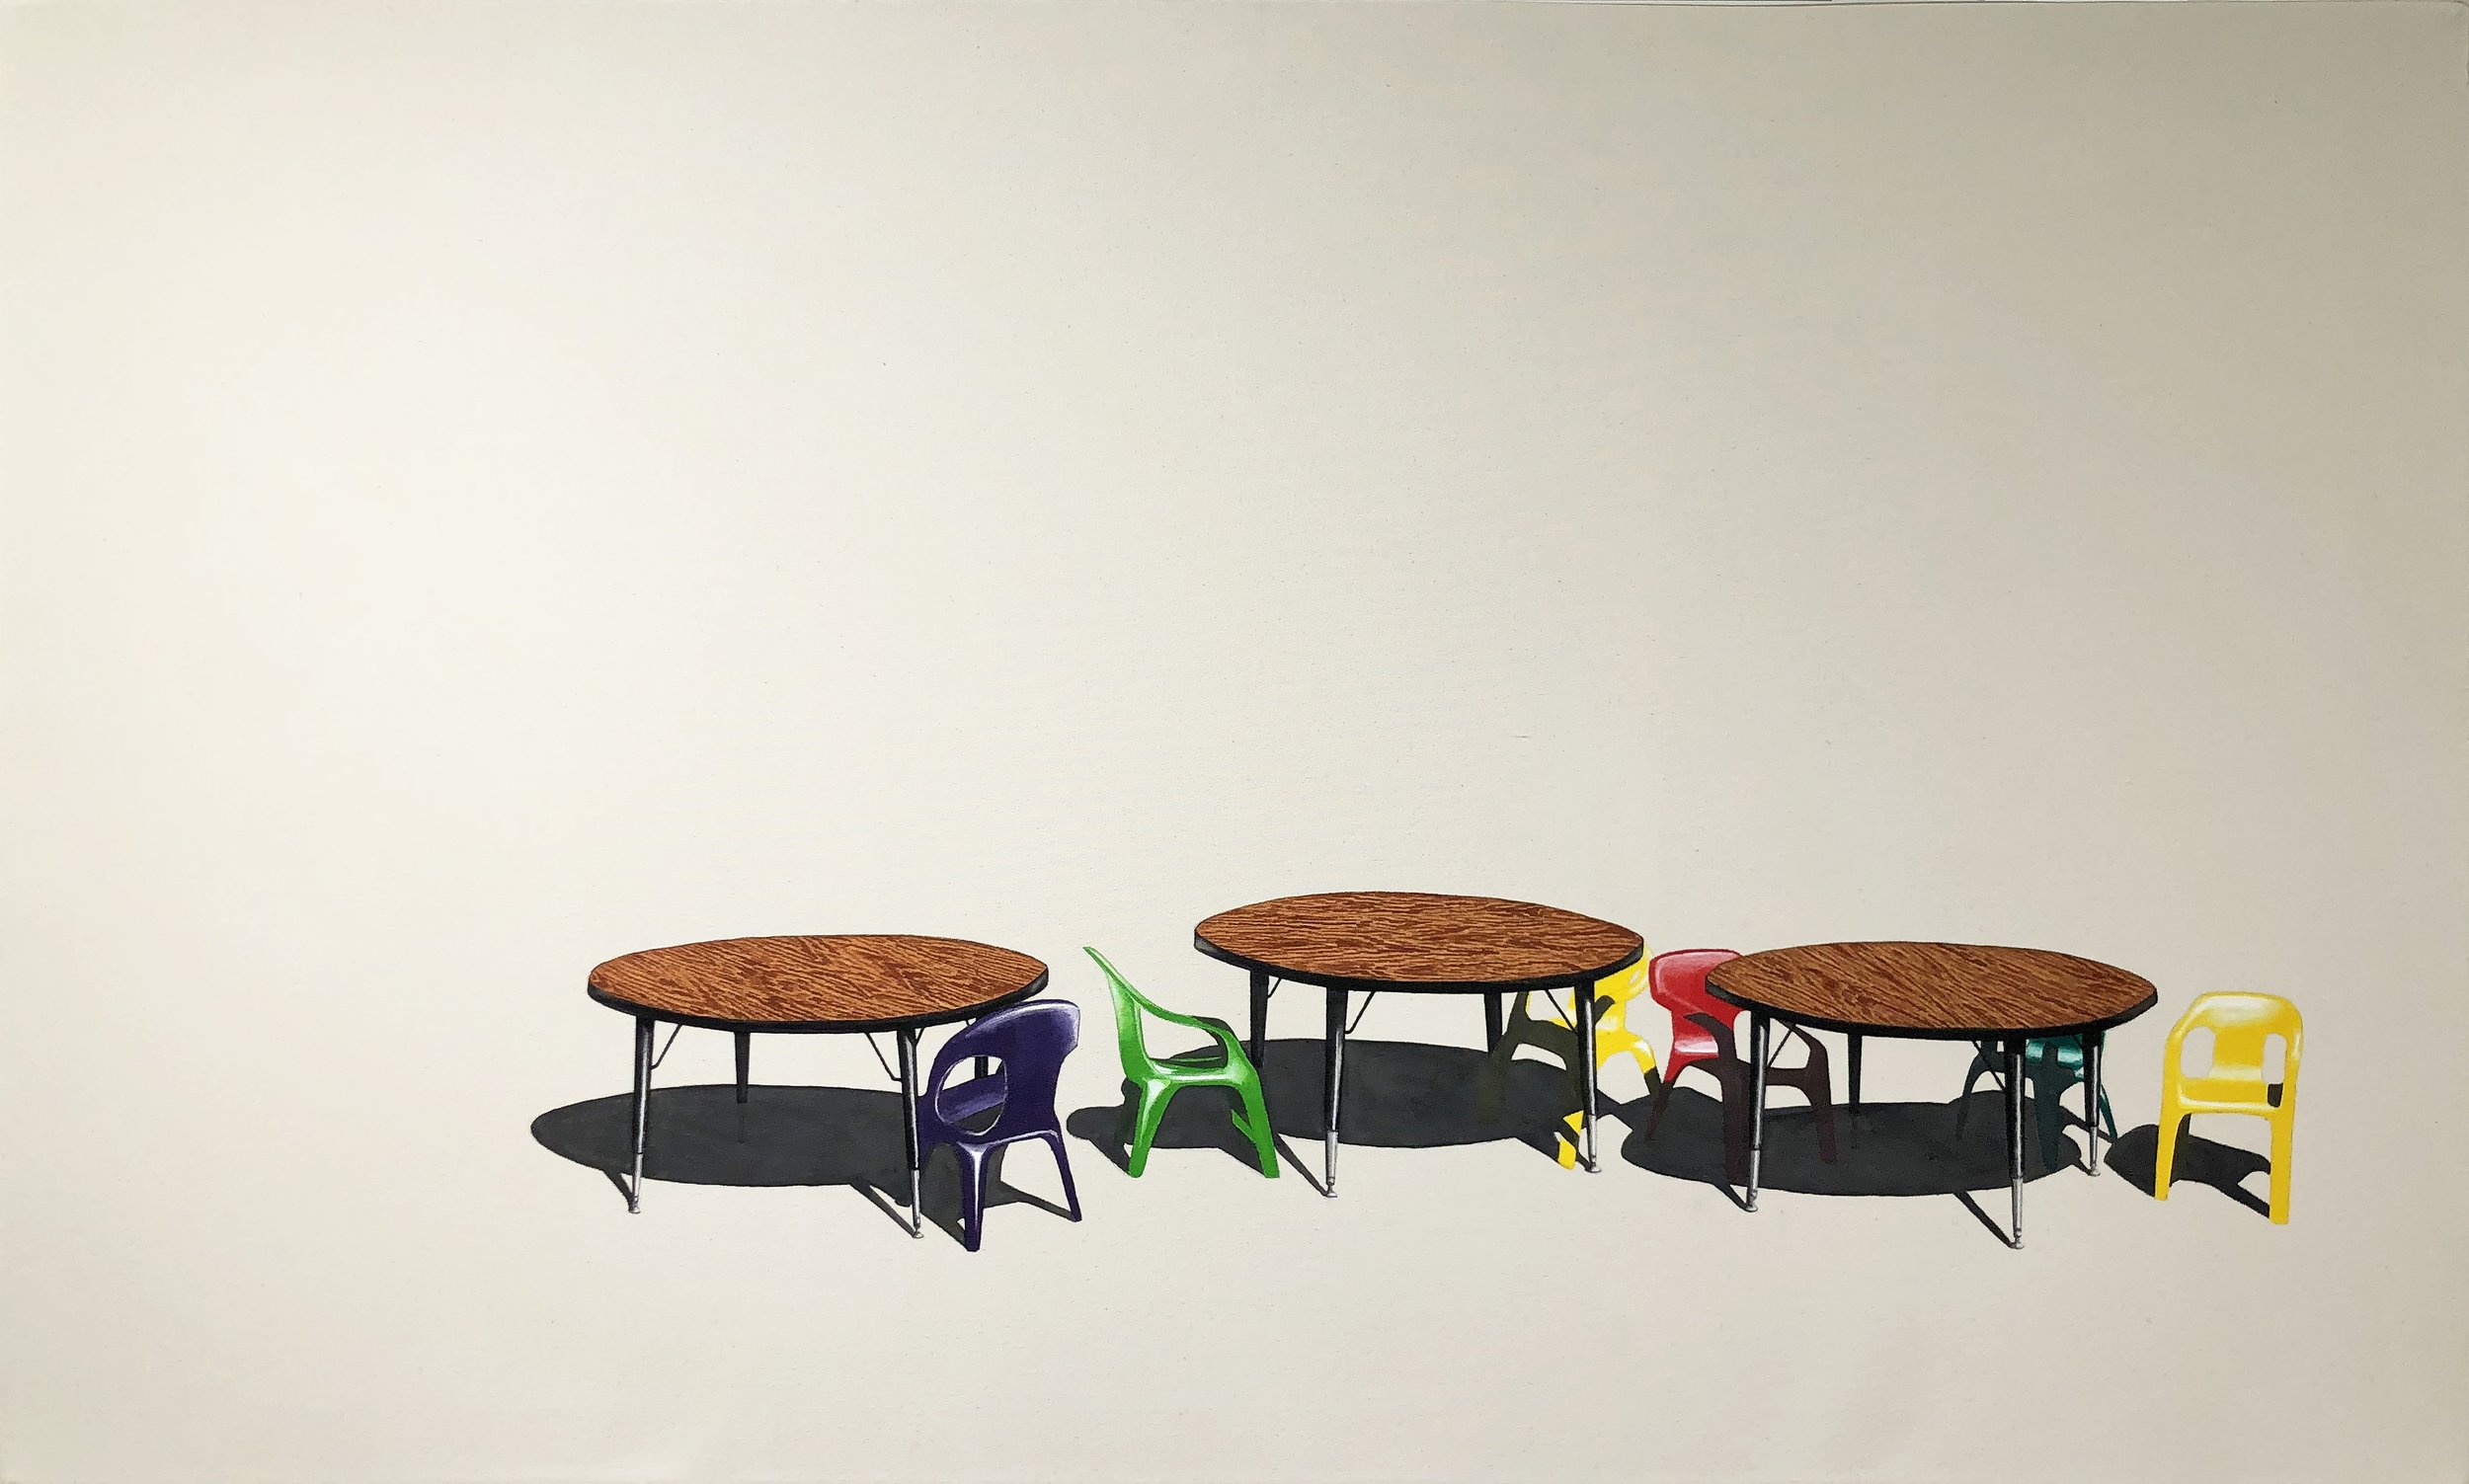   Chairs Missing , 2020 Acrylic and black gesso on canvas 36 x 60 inches (91.5cm x 152.4cm) 